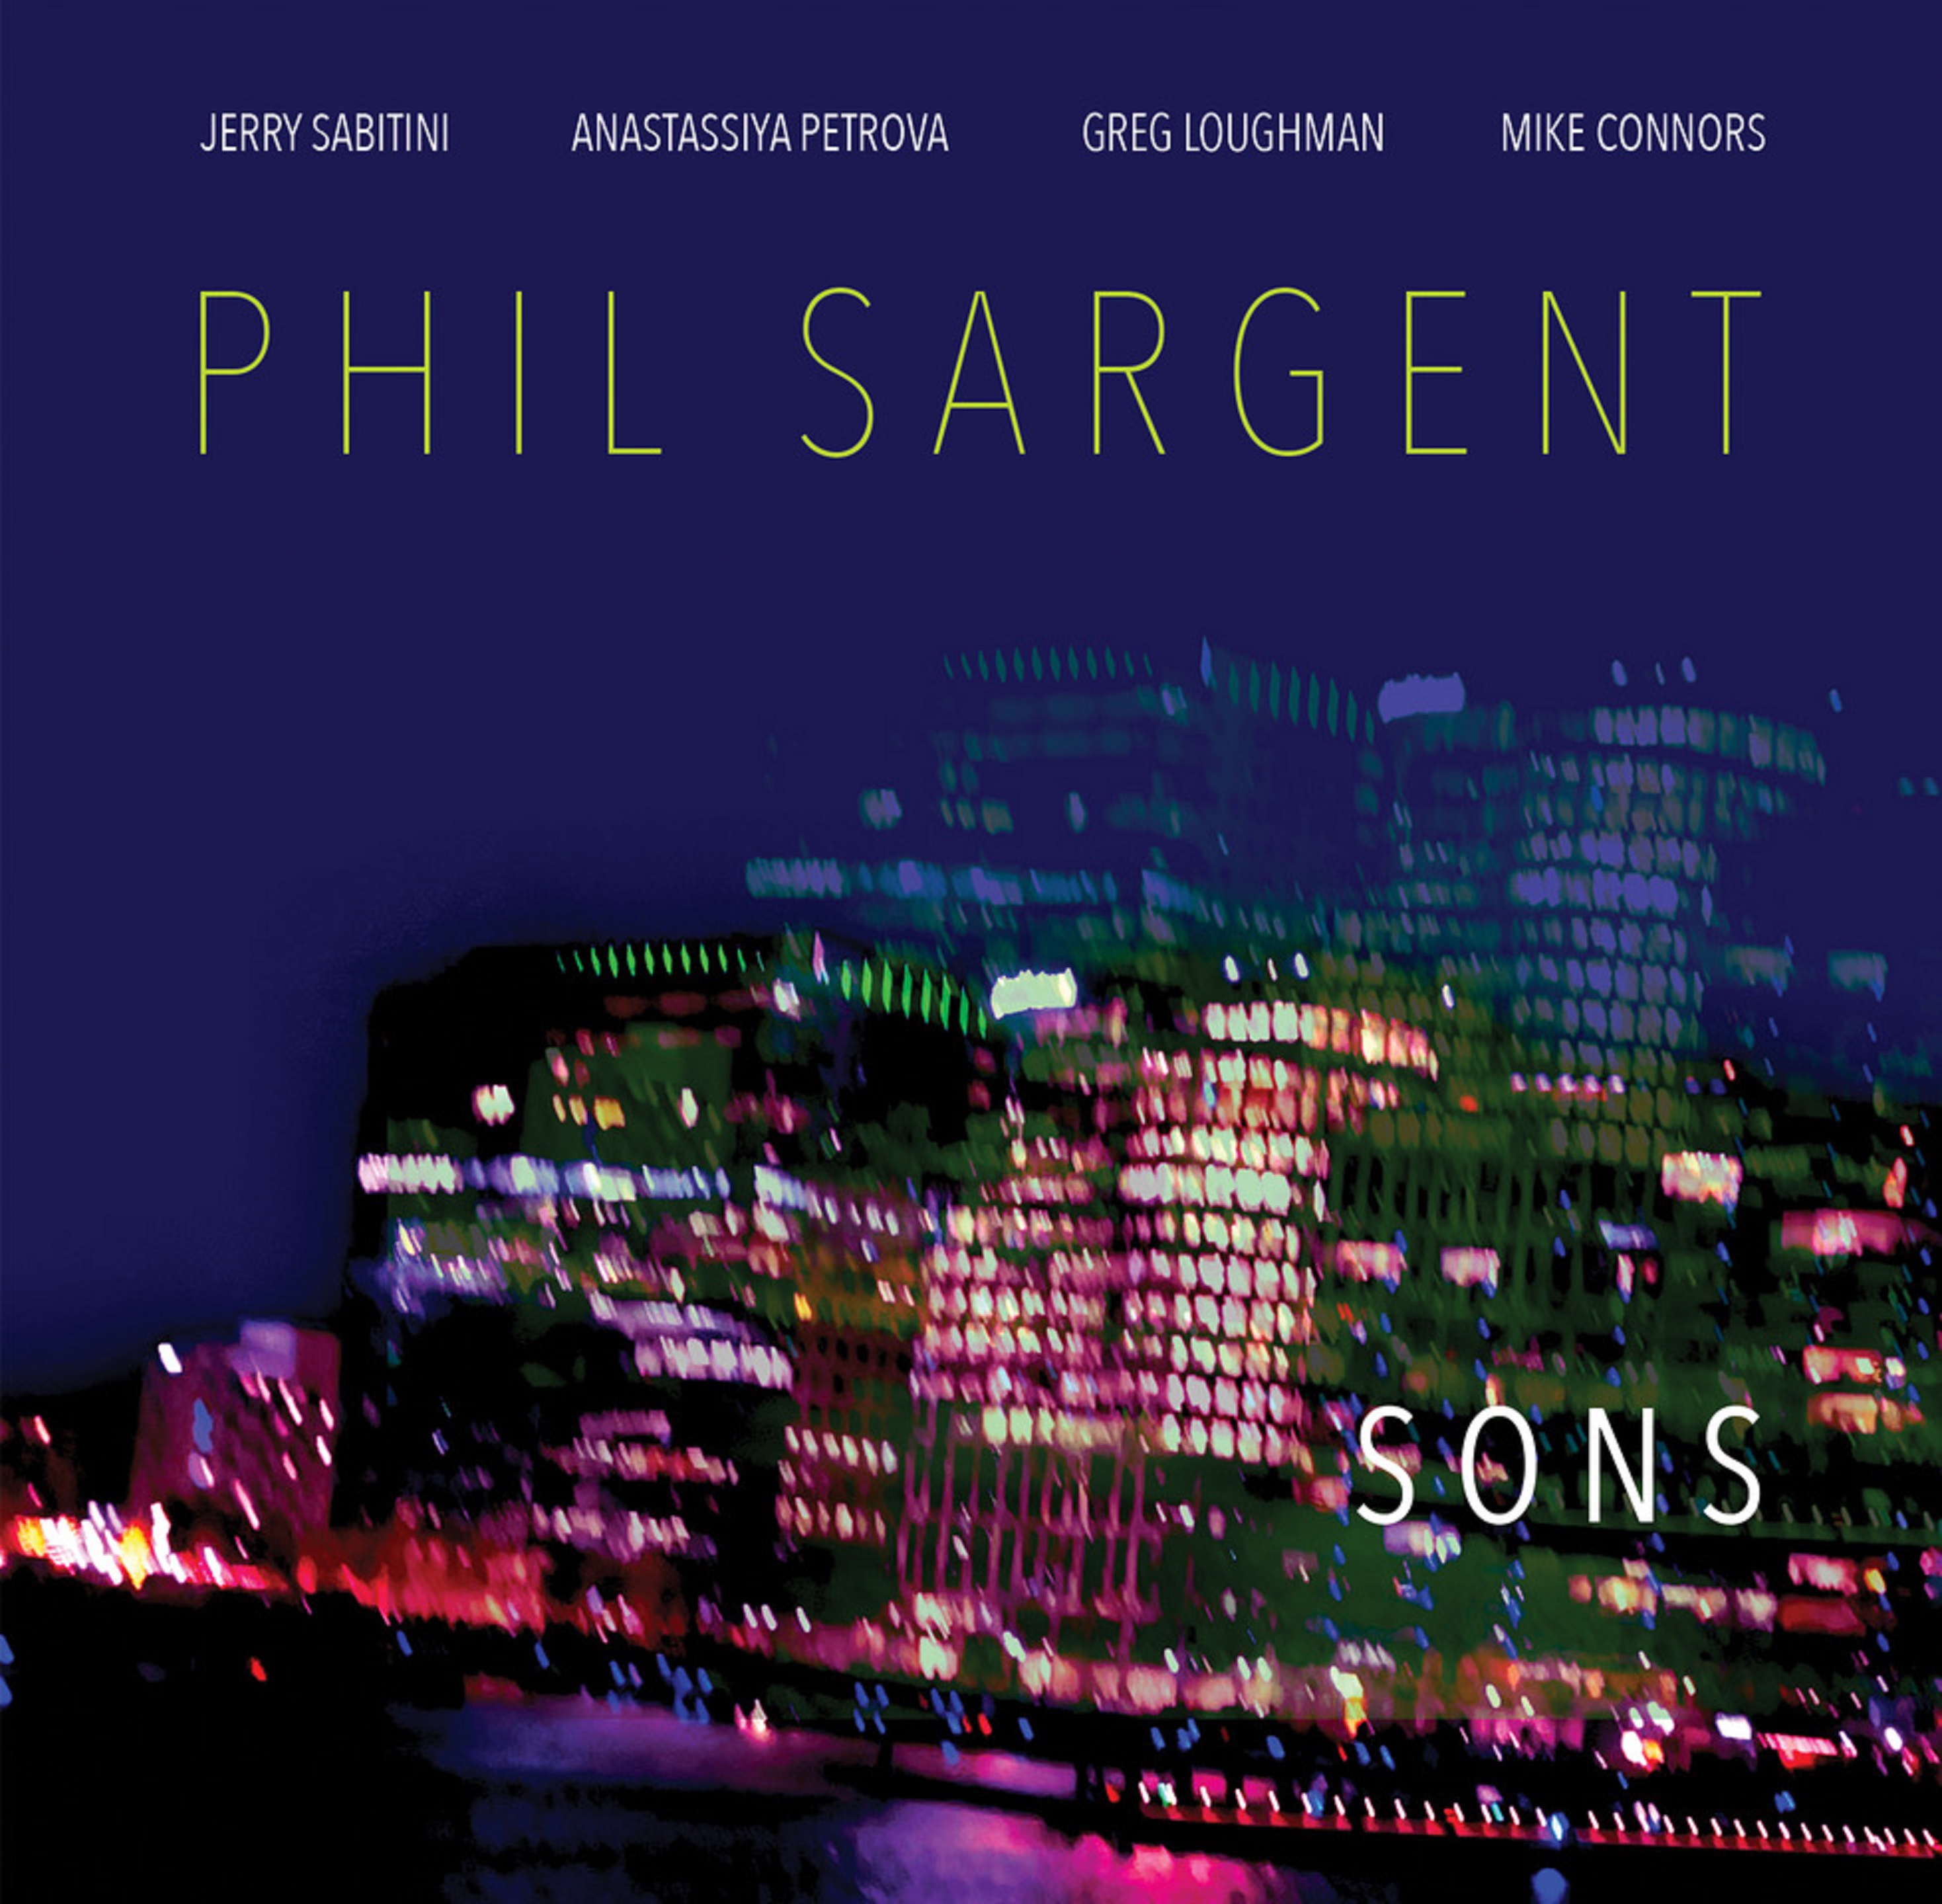 Guitarist and composer Phil Sargent presents his long-awaited third album, “Sons”